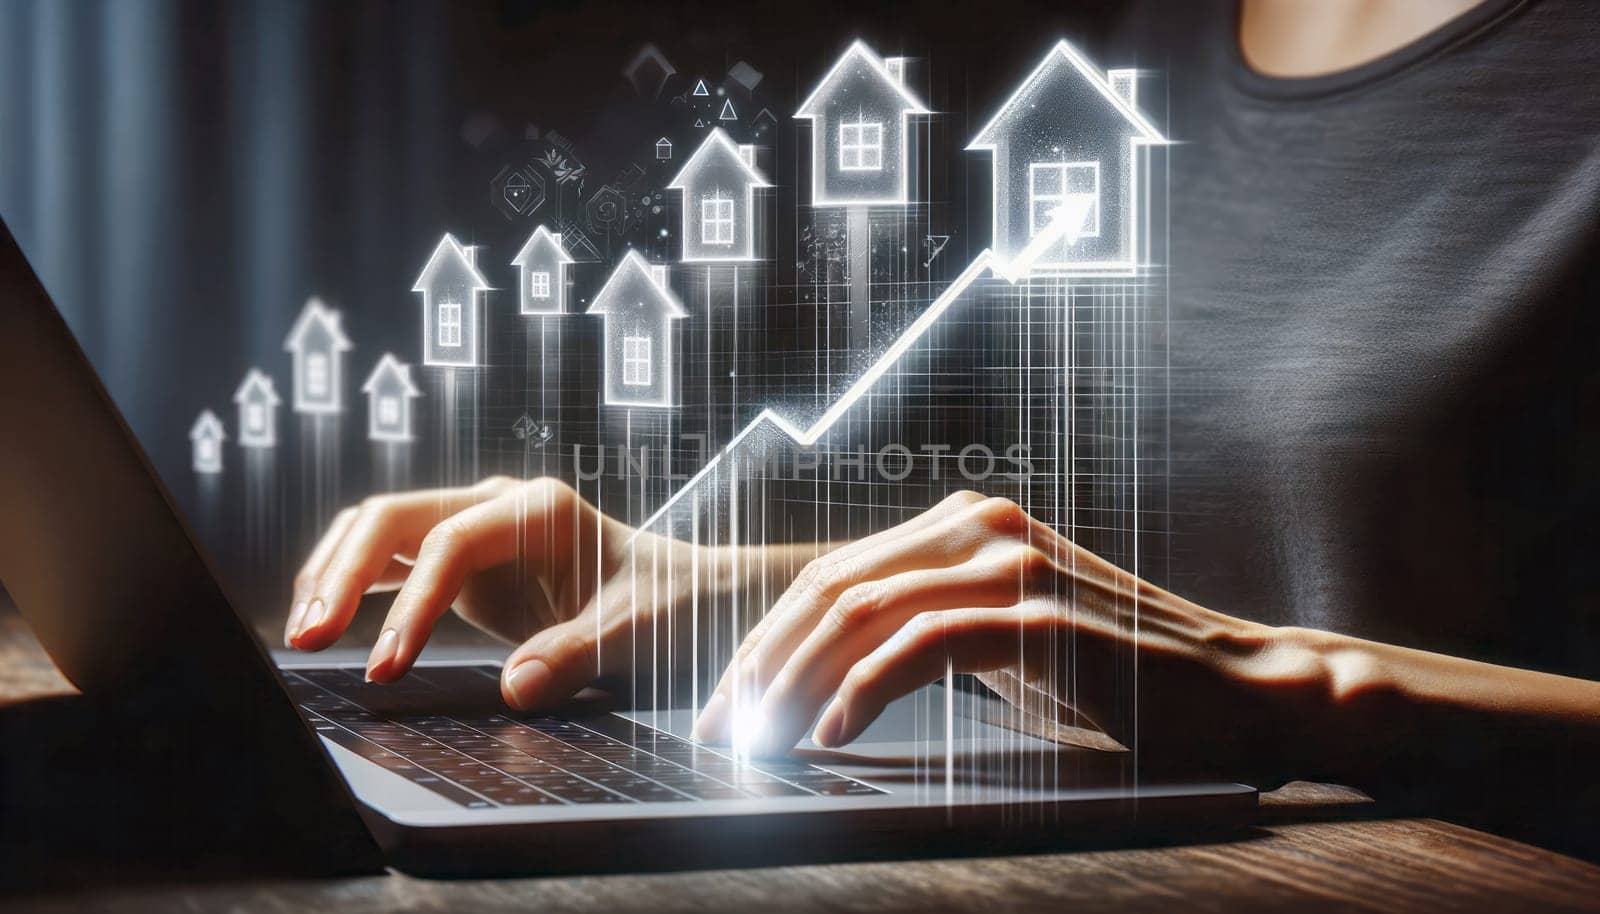 A digital illustration of a person's hands interacting with a laptop keyboard, with translucent graphic icons of houses and an upward trend line floating above, symbolizing real estate growth or property investment. The house icons increase in size from left to right, representing a growth concept. The background is dark, with a soft focus on the hands and the laptop to accentuate the floating graphics. The person's face is not visible, maintaining the focus on the real estate growth imagery.